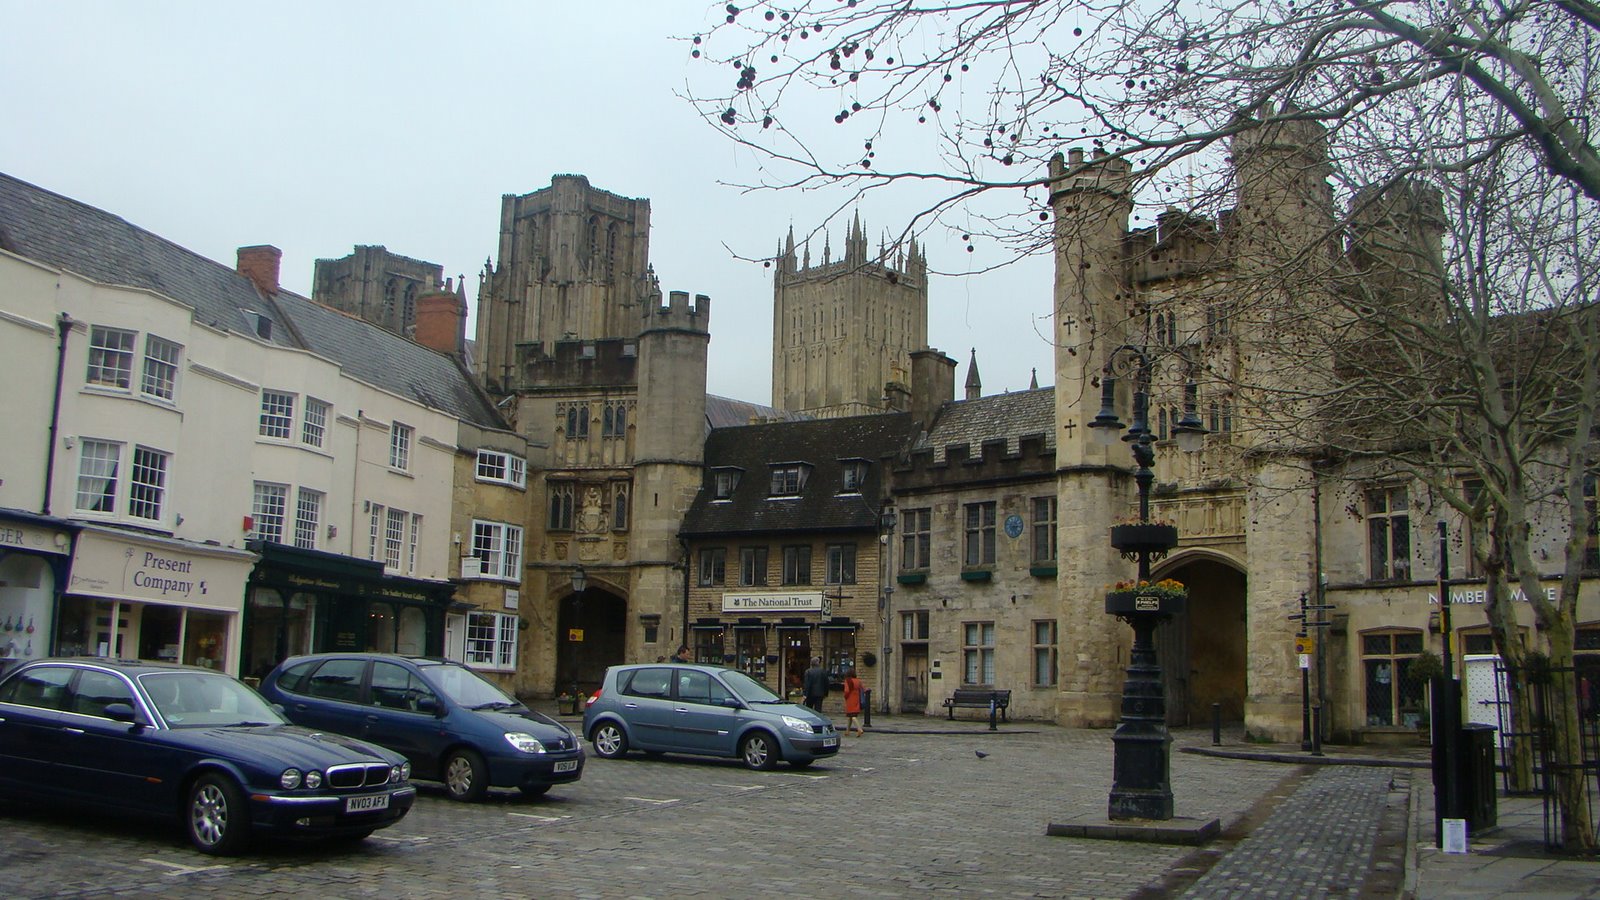 [Entrance+to+the+Cathedral+Close+Wells.jpg]